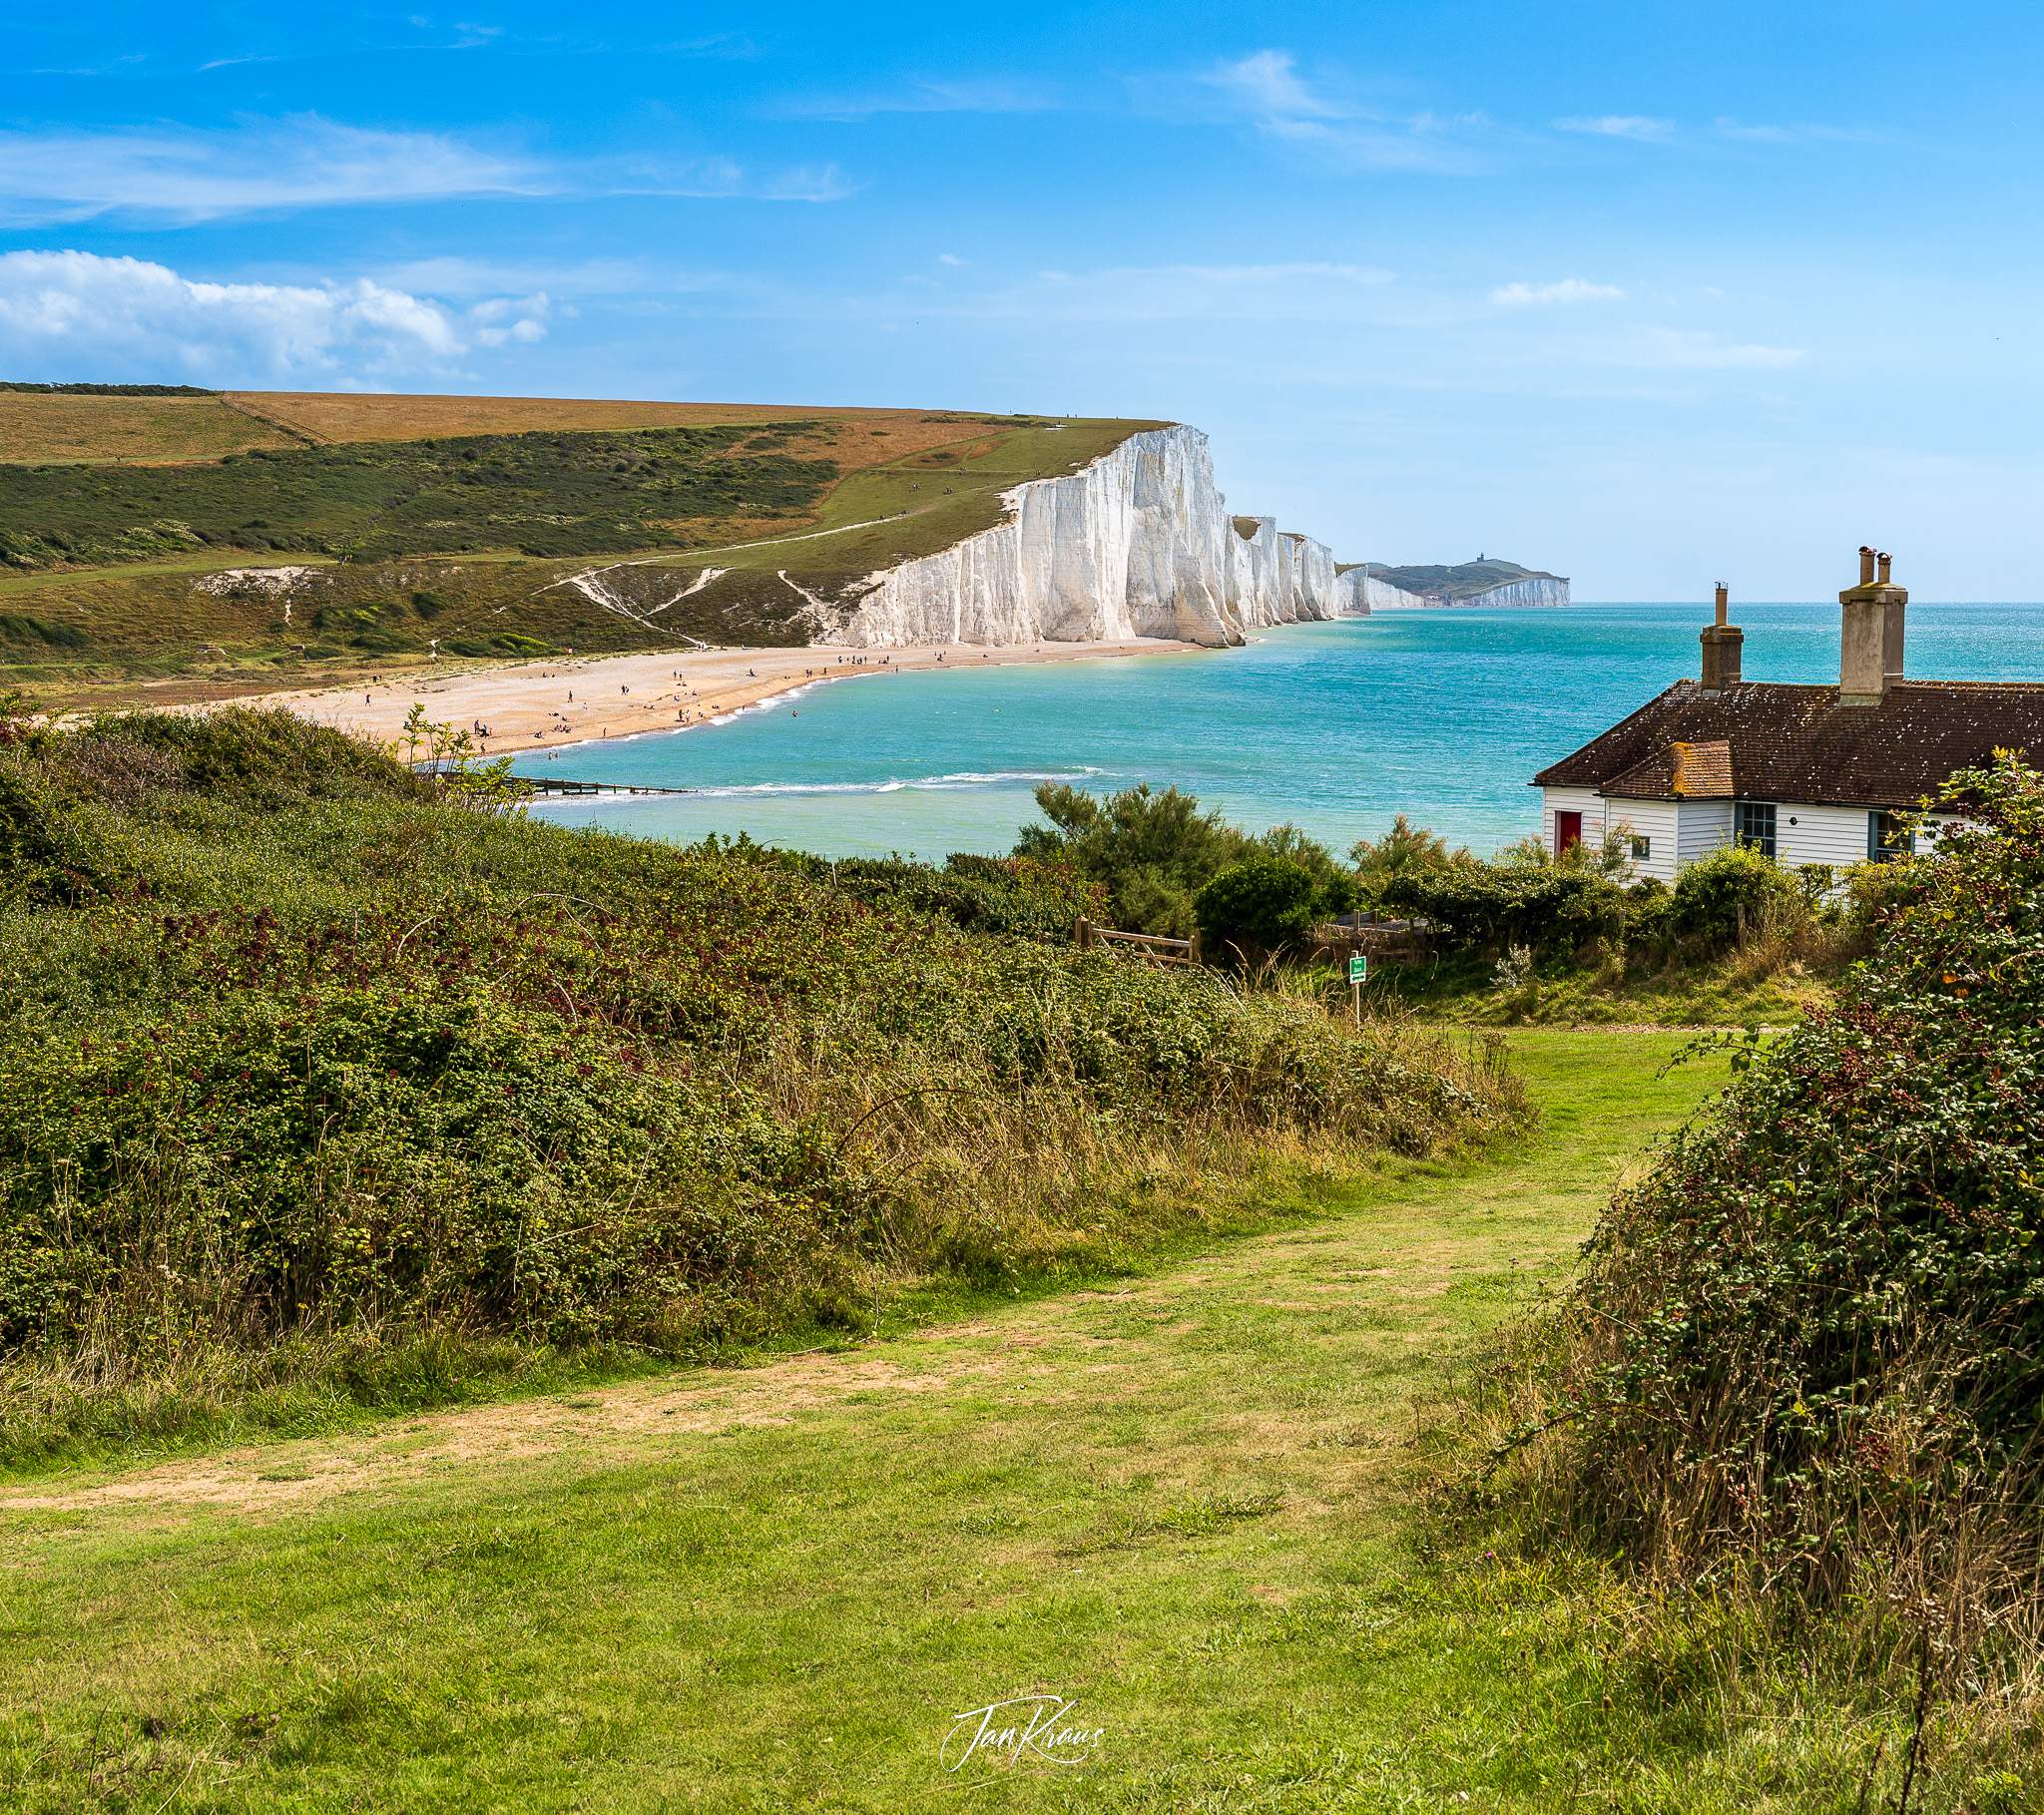 Coastguard Cottages with the stunning background of Cuckmere Haven at the Seven Sisters Walk, East Sussex, England, UK